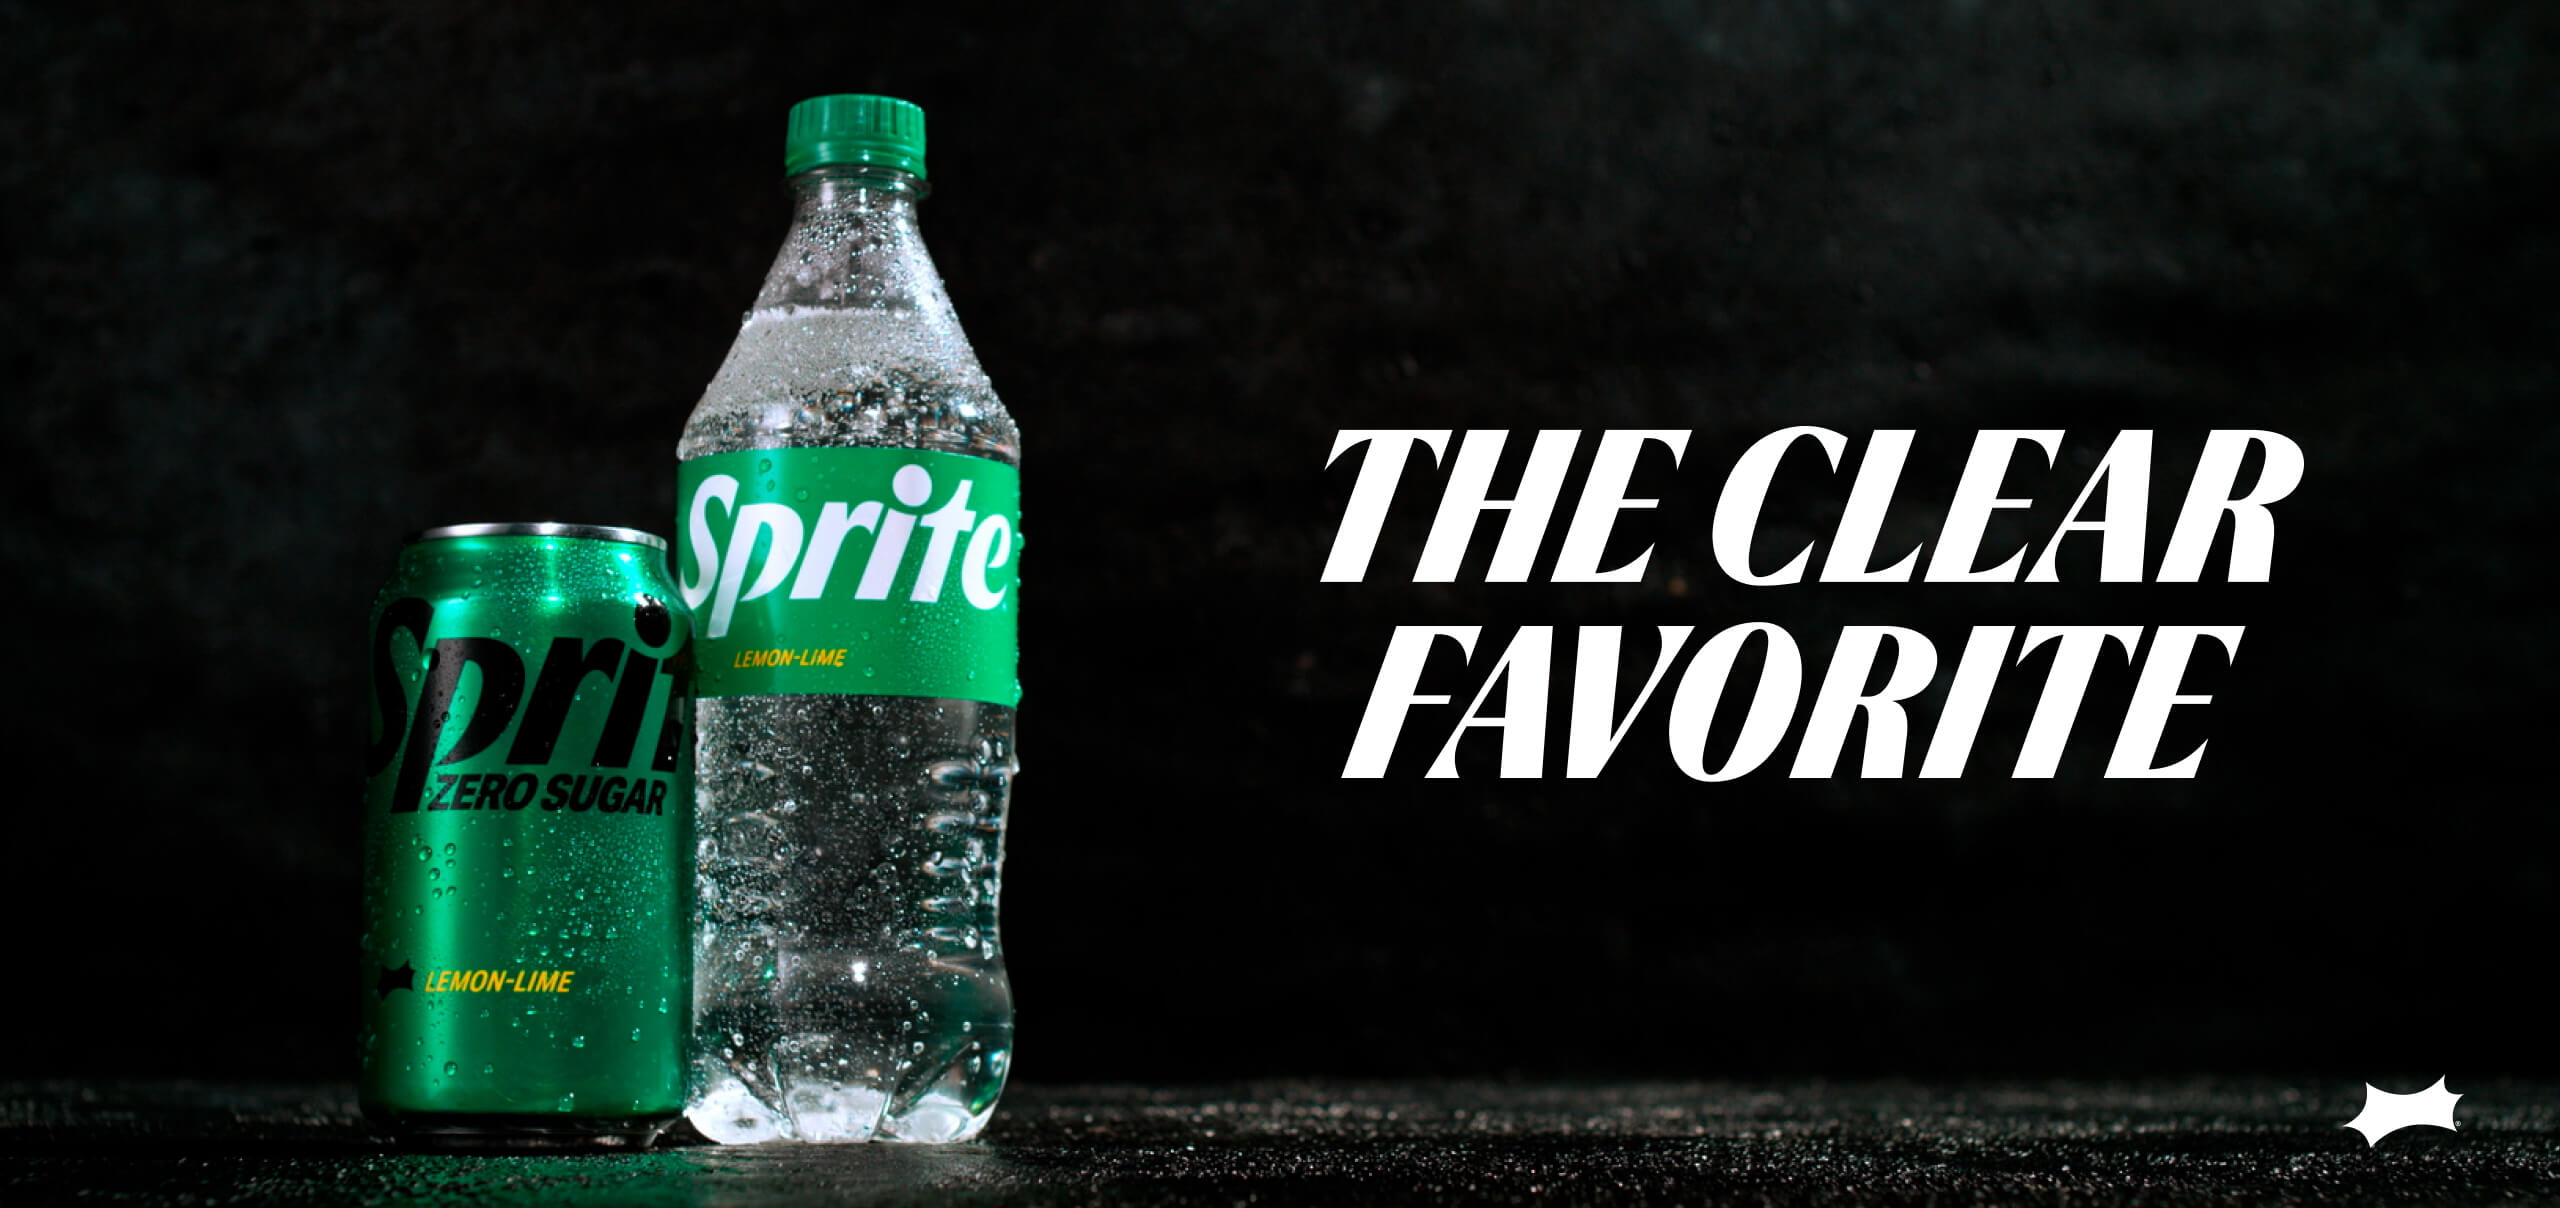 A can of Sprite Zero Sugar and a bottle of Sprite on a black backgroud next to text reading "The Clear Favorite"